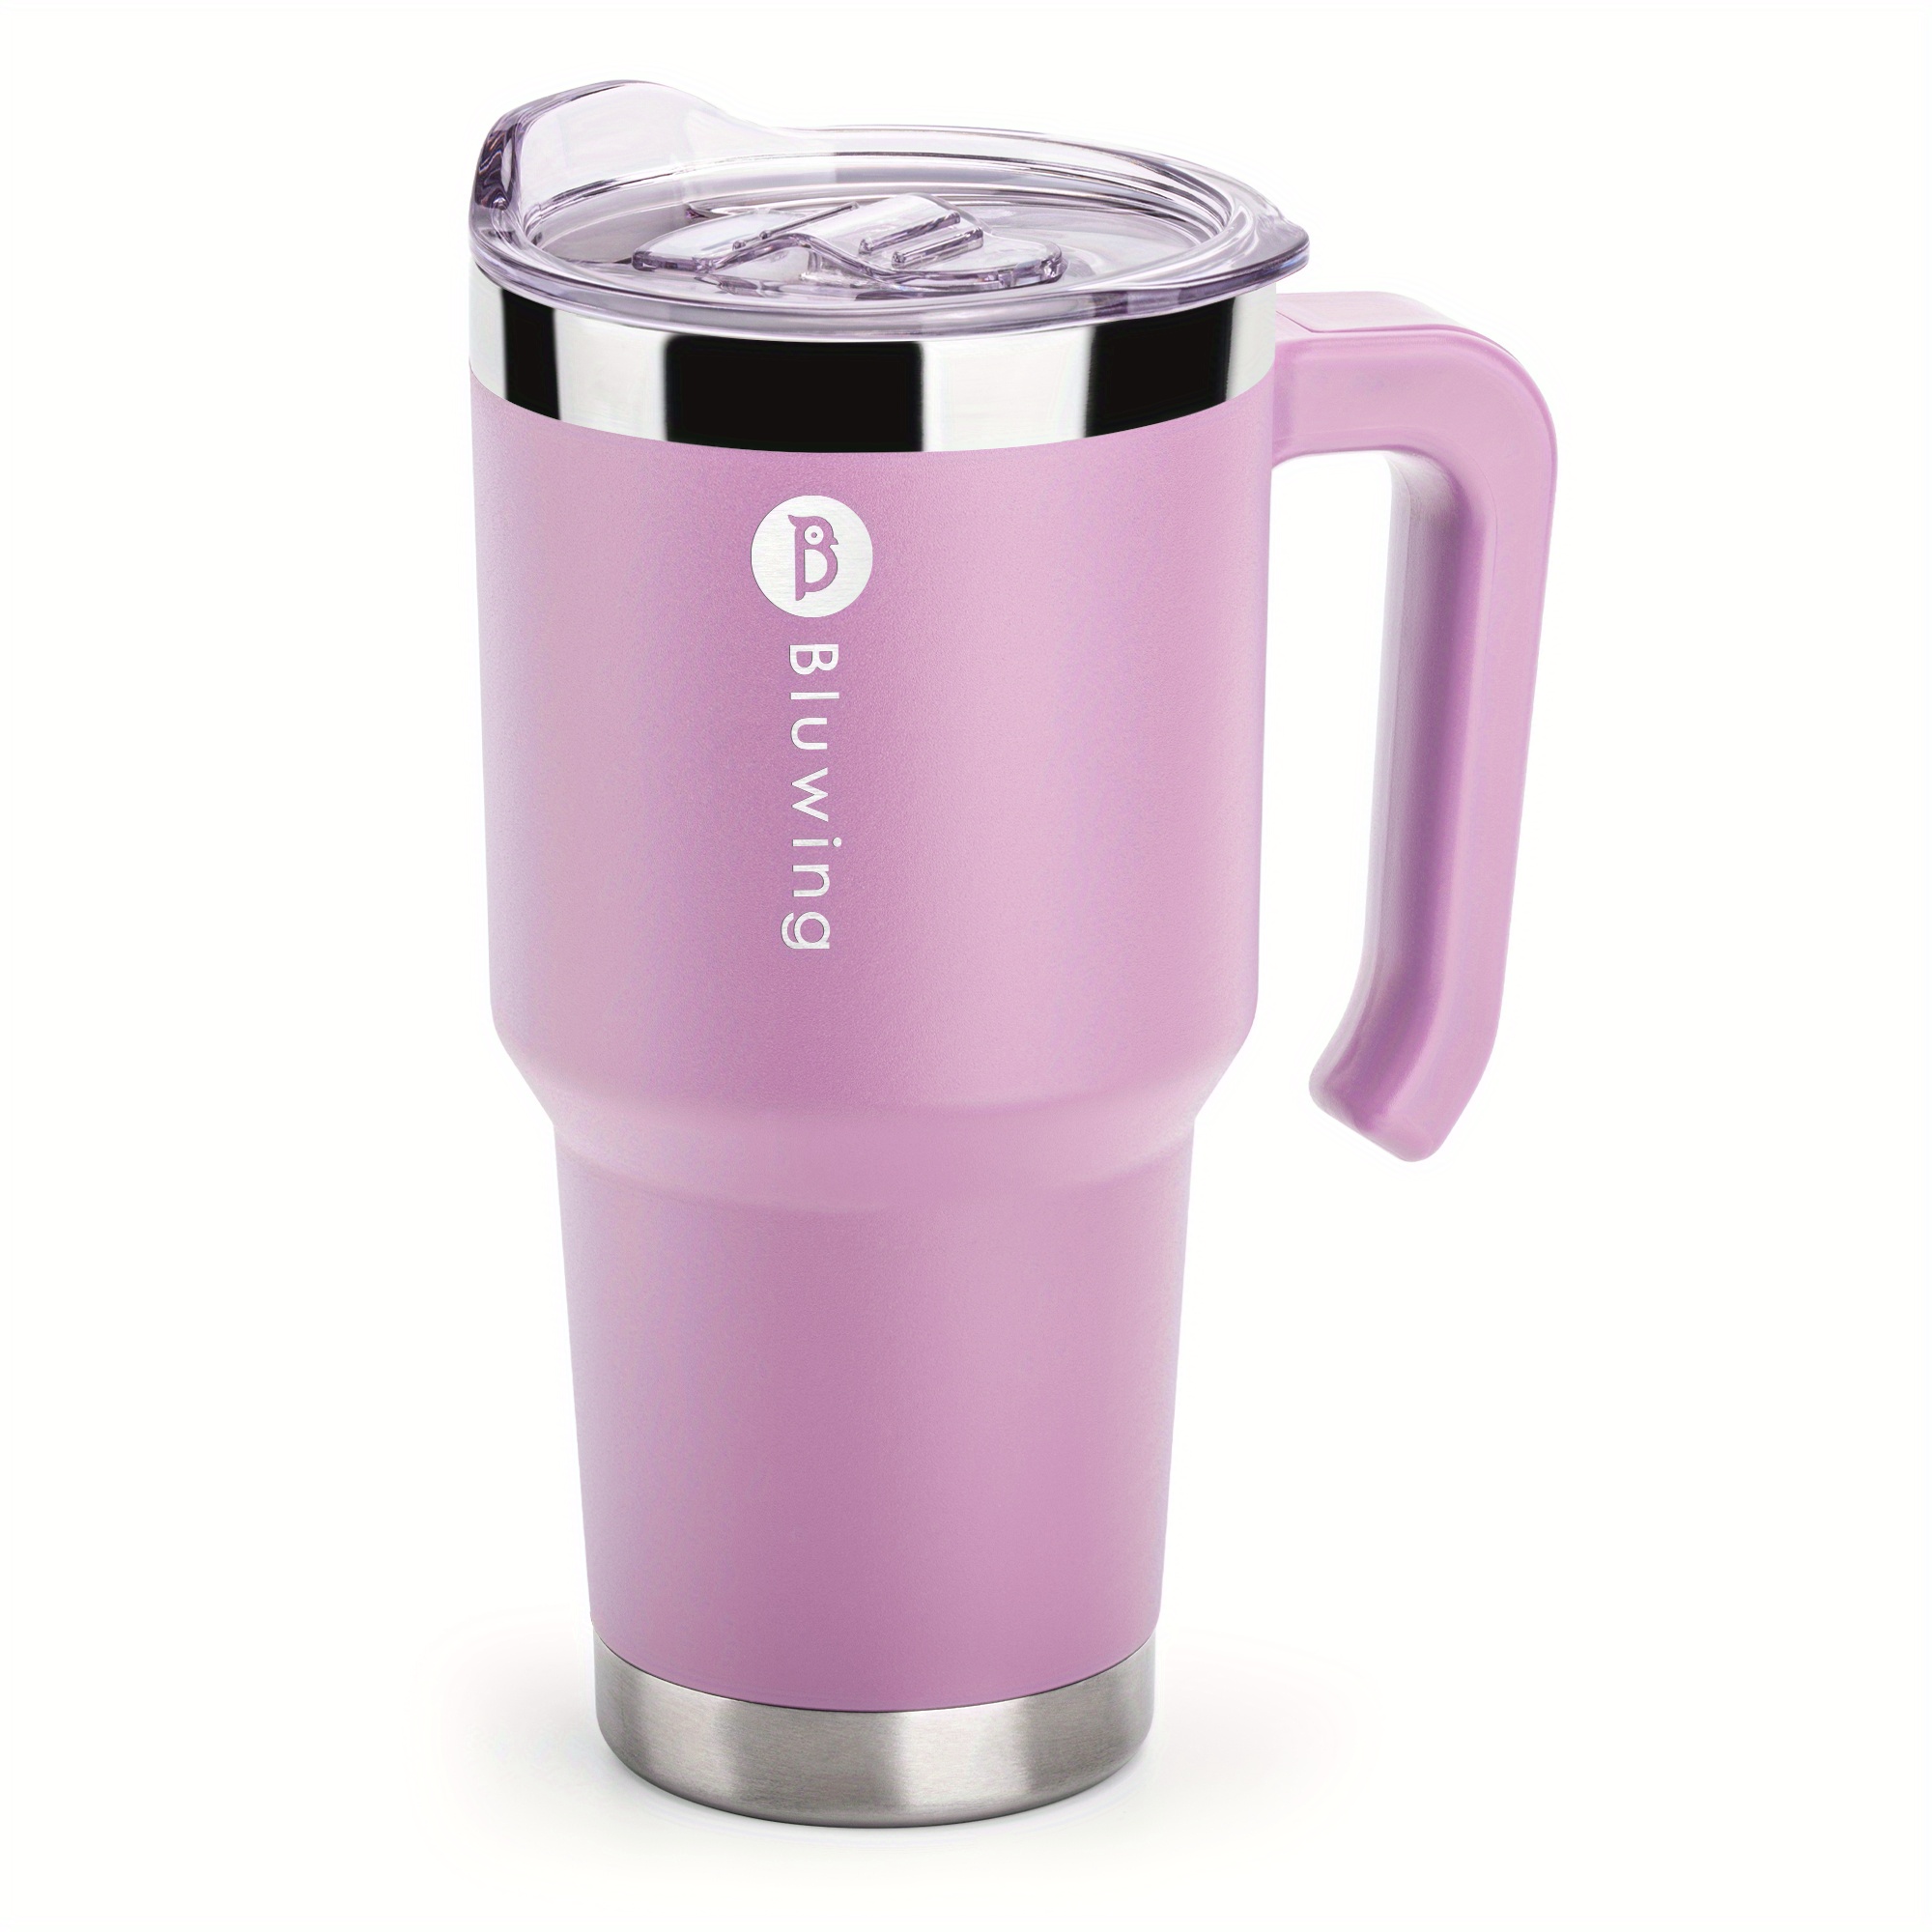 8 oz Thermos Coffee Travel Stainless Steel Teal w/pink trim, Ultra-Thin